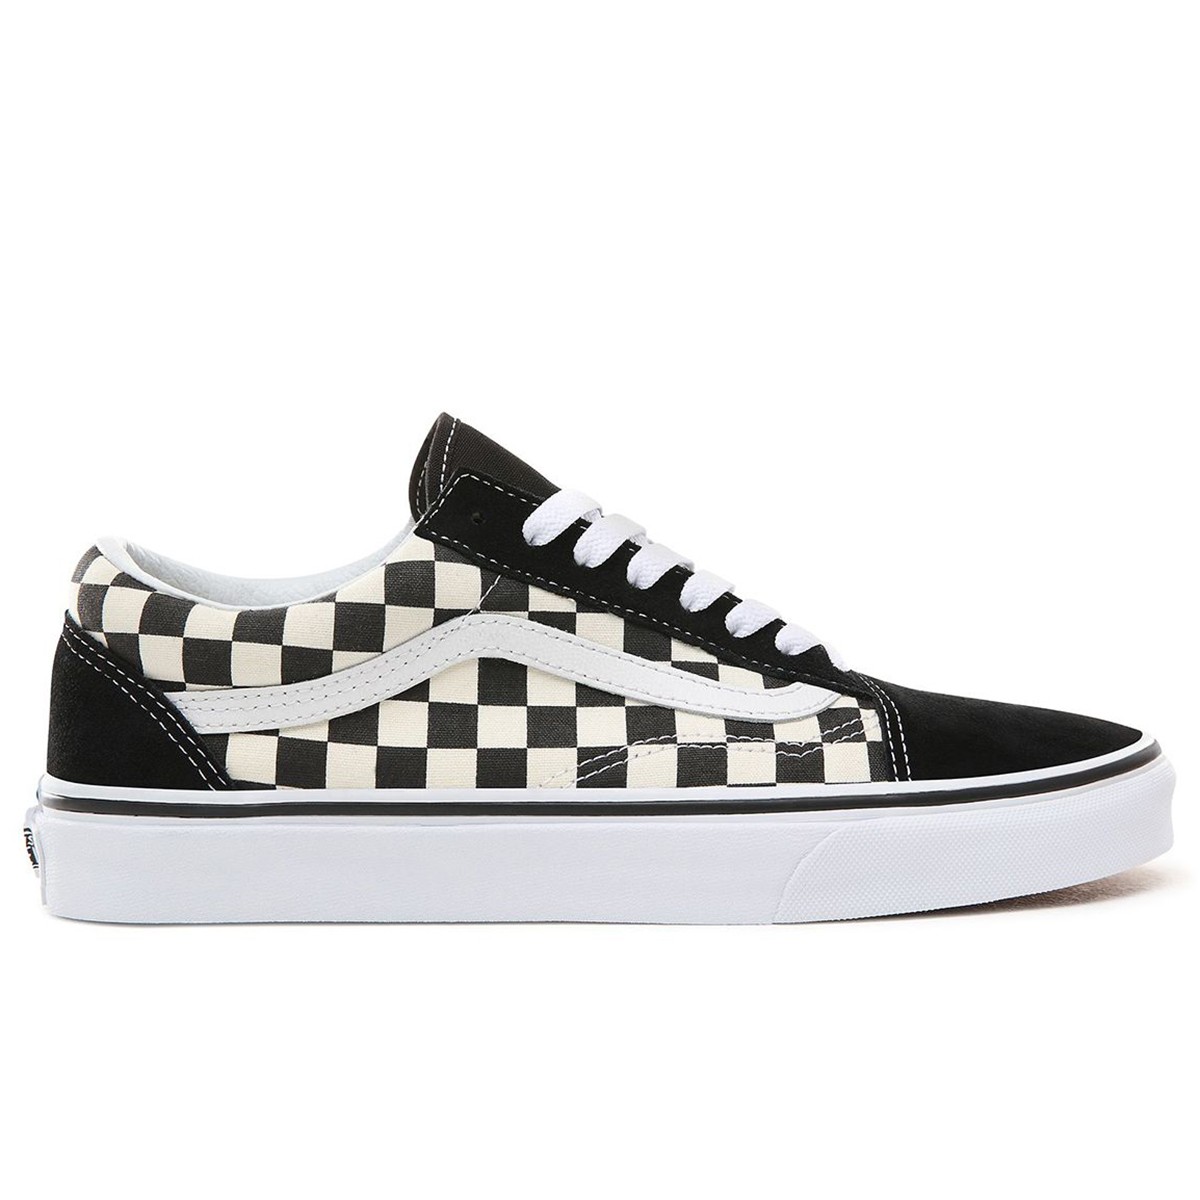 VANS Classic Old Skool Primary check black / white shoes